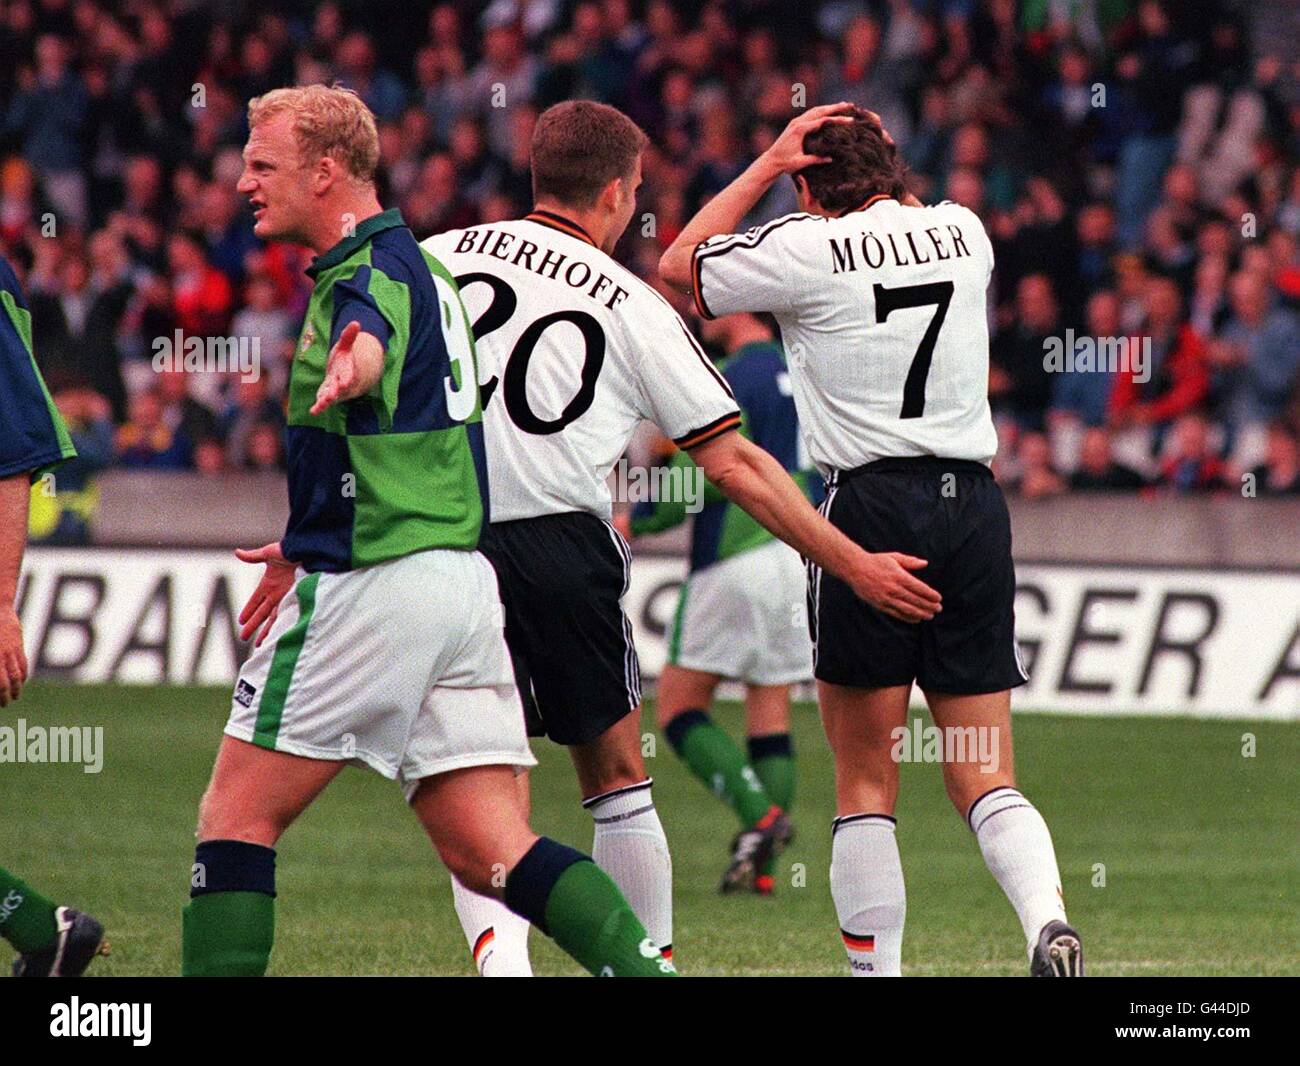 Northern Ireland's Iain Dowie argues a point as Andreas Moller of Germany is consoled by Oliver Bierhoff after he missed a penalty, the second penalty miss in the first half of their International friendly in Belfast. Stock Photo